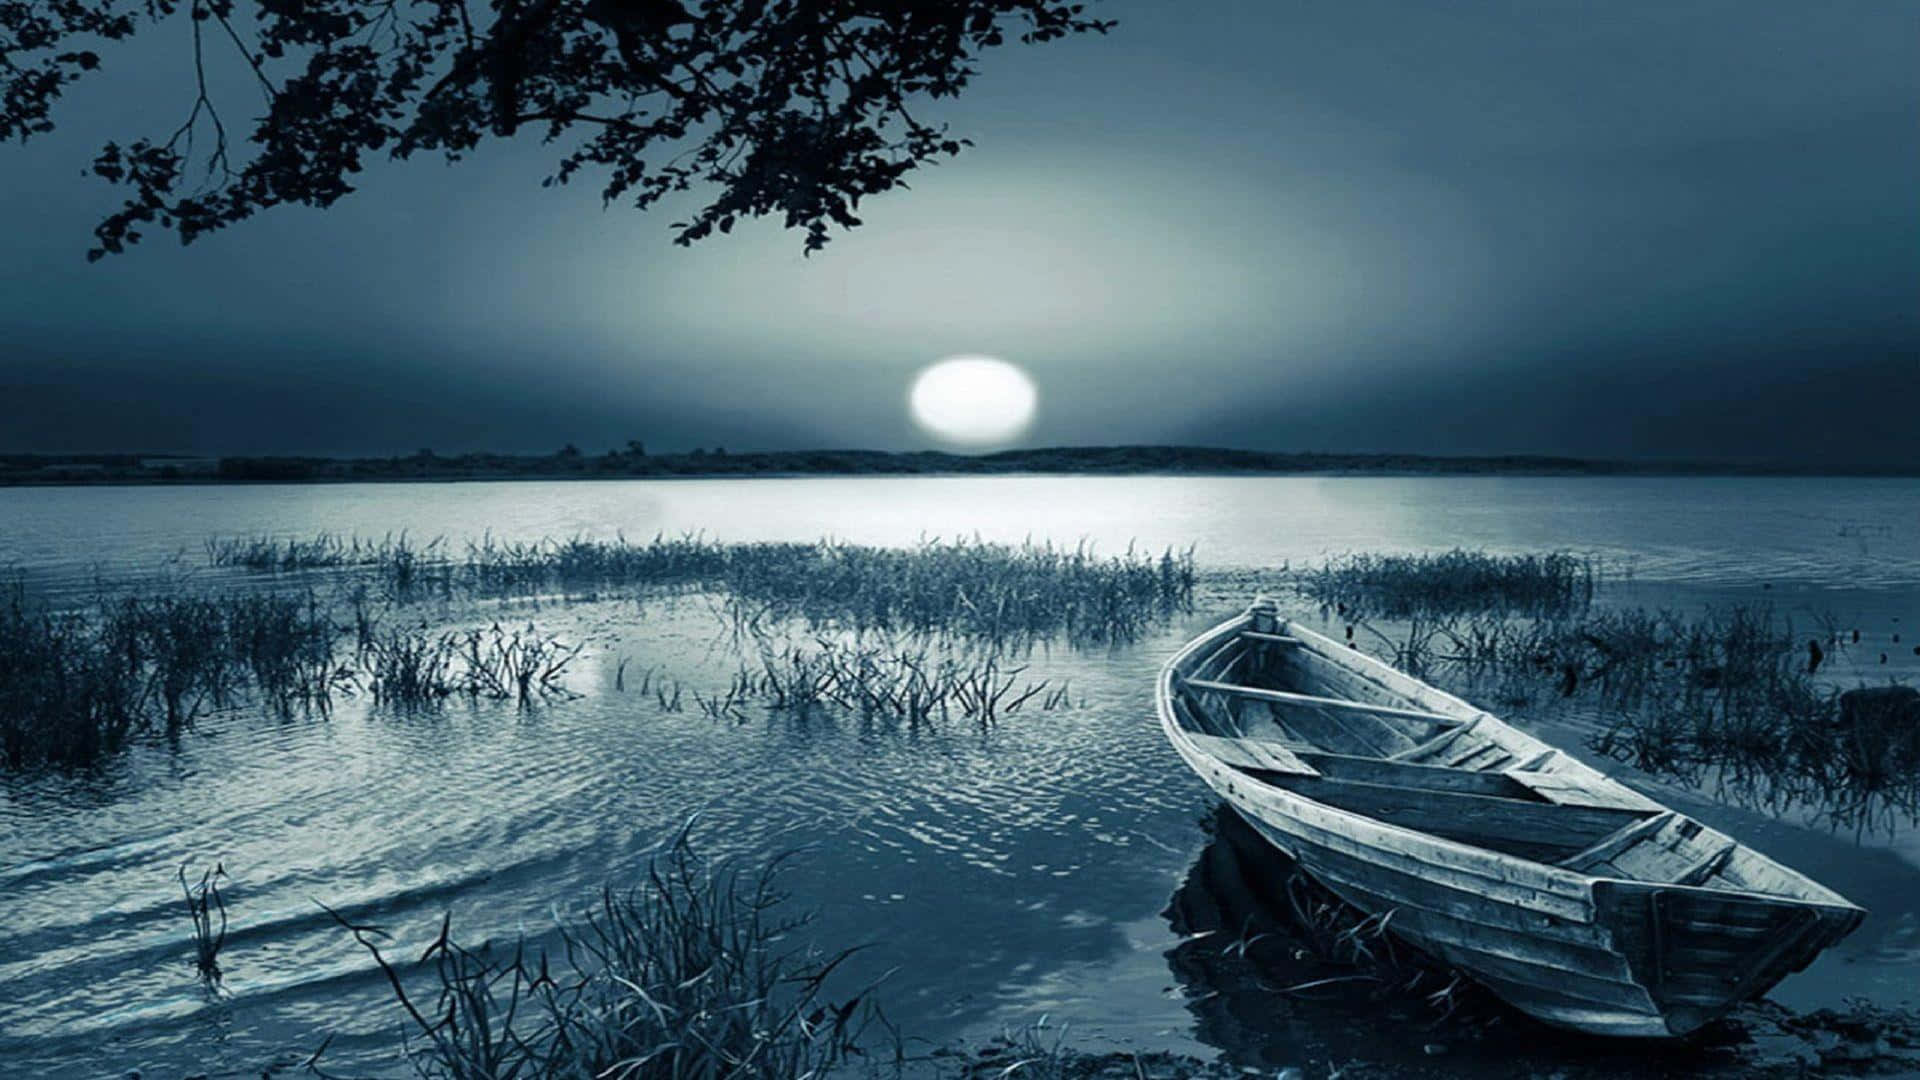 Exceptional Moonlight And A Boat Wallpaper